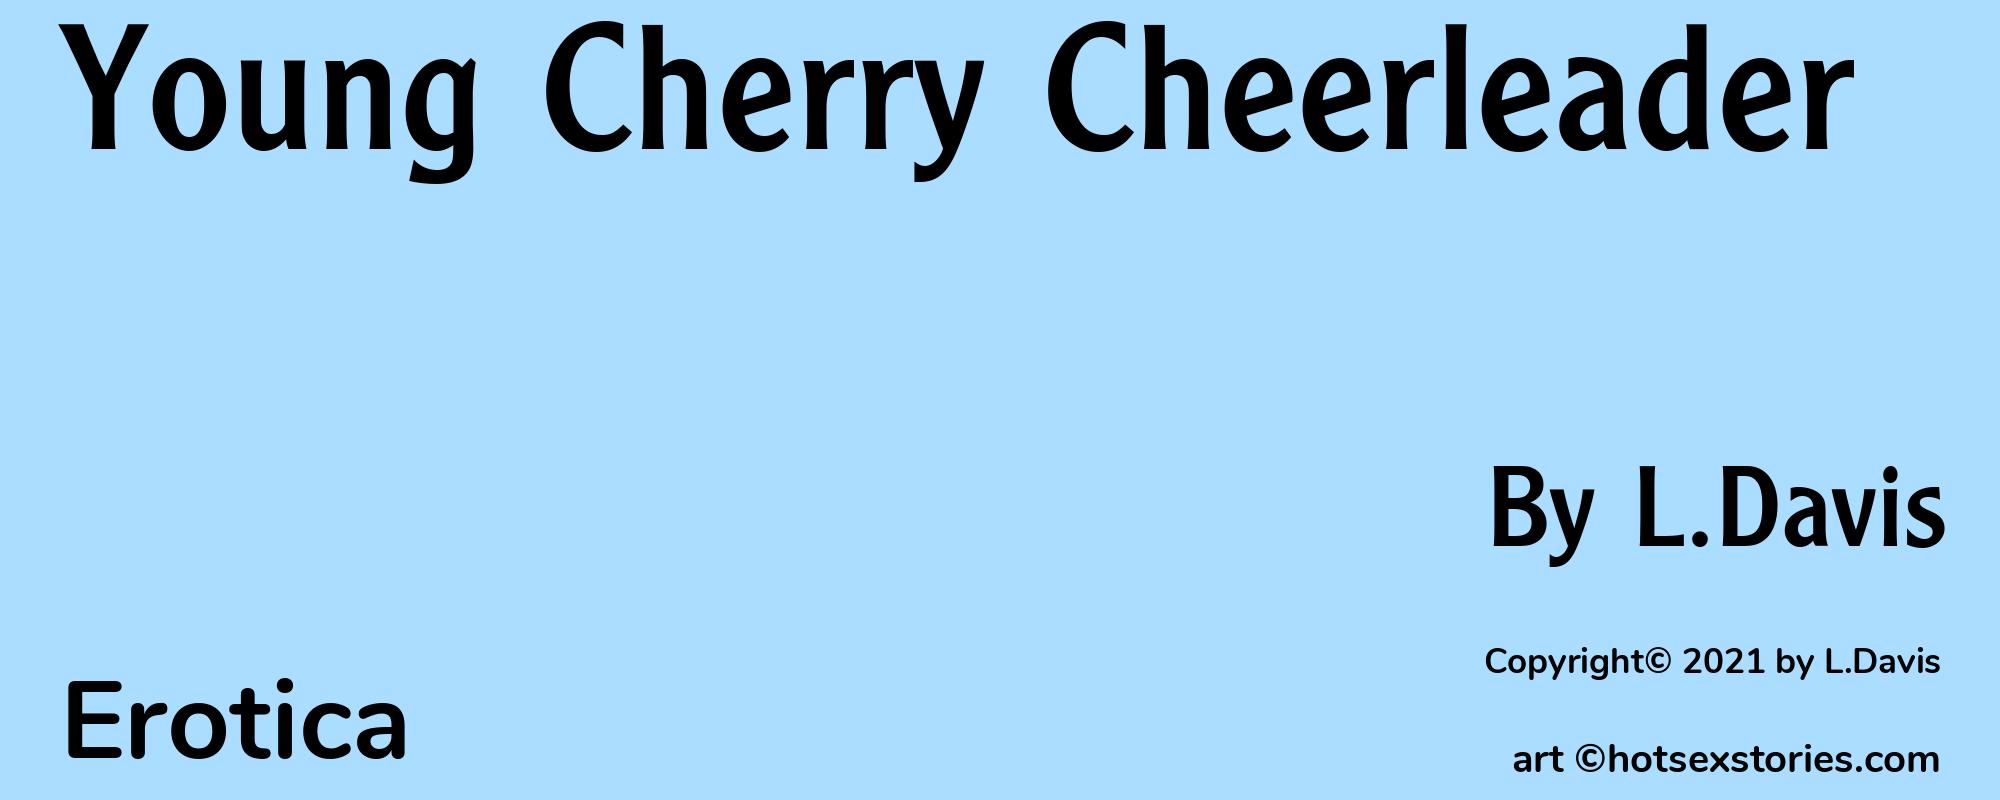 Young Cherry Cheerleader - Cover